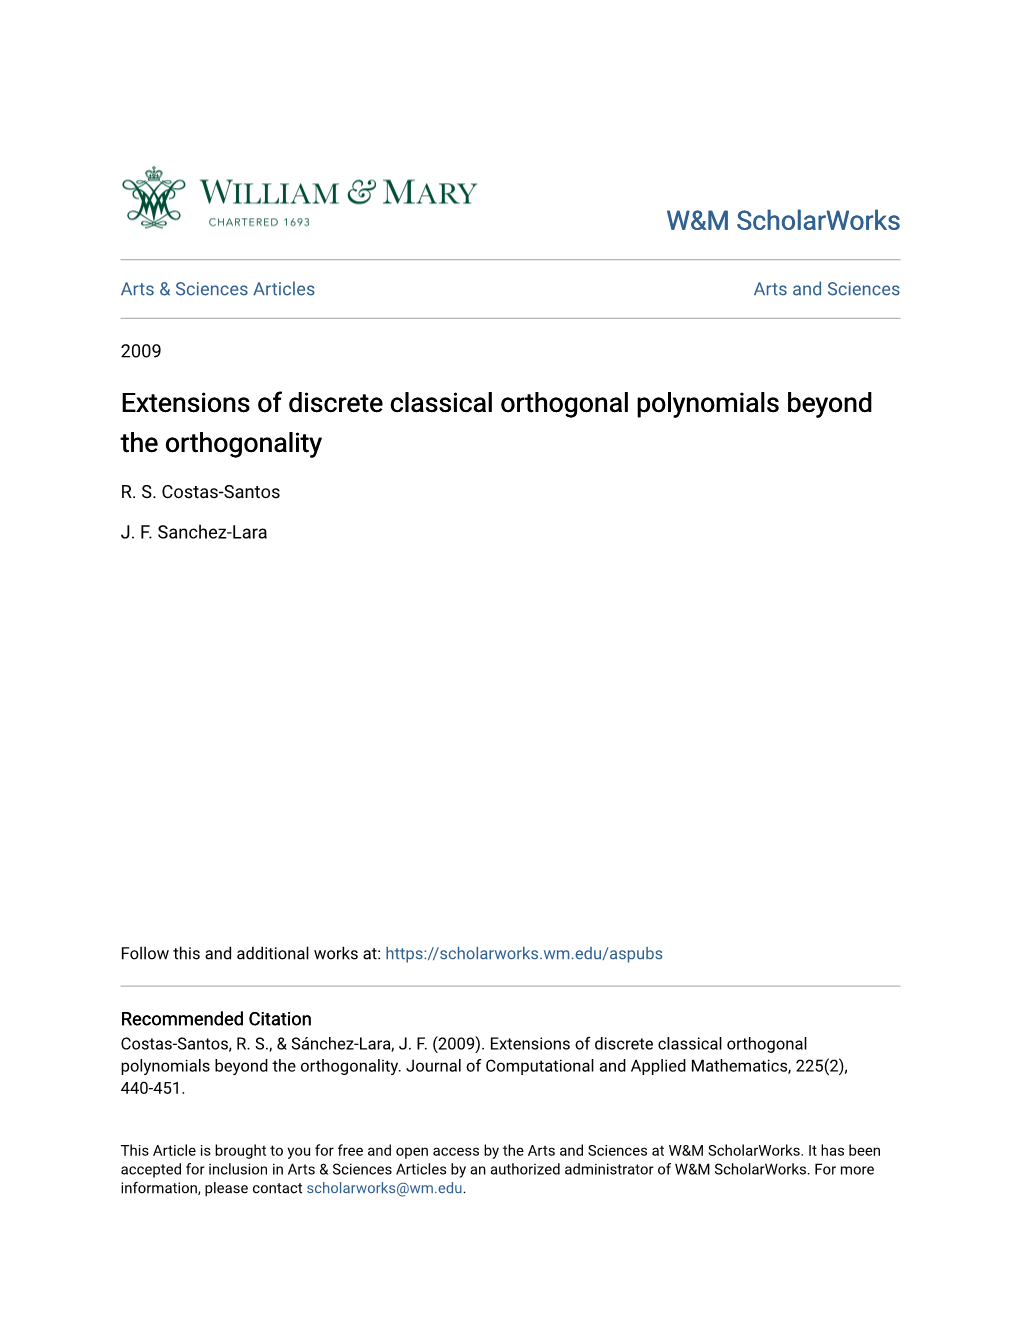 Extensions of Discrete Classical Orthogonal Polynomials Beyond the Orthogonality